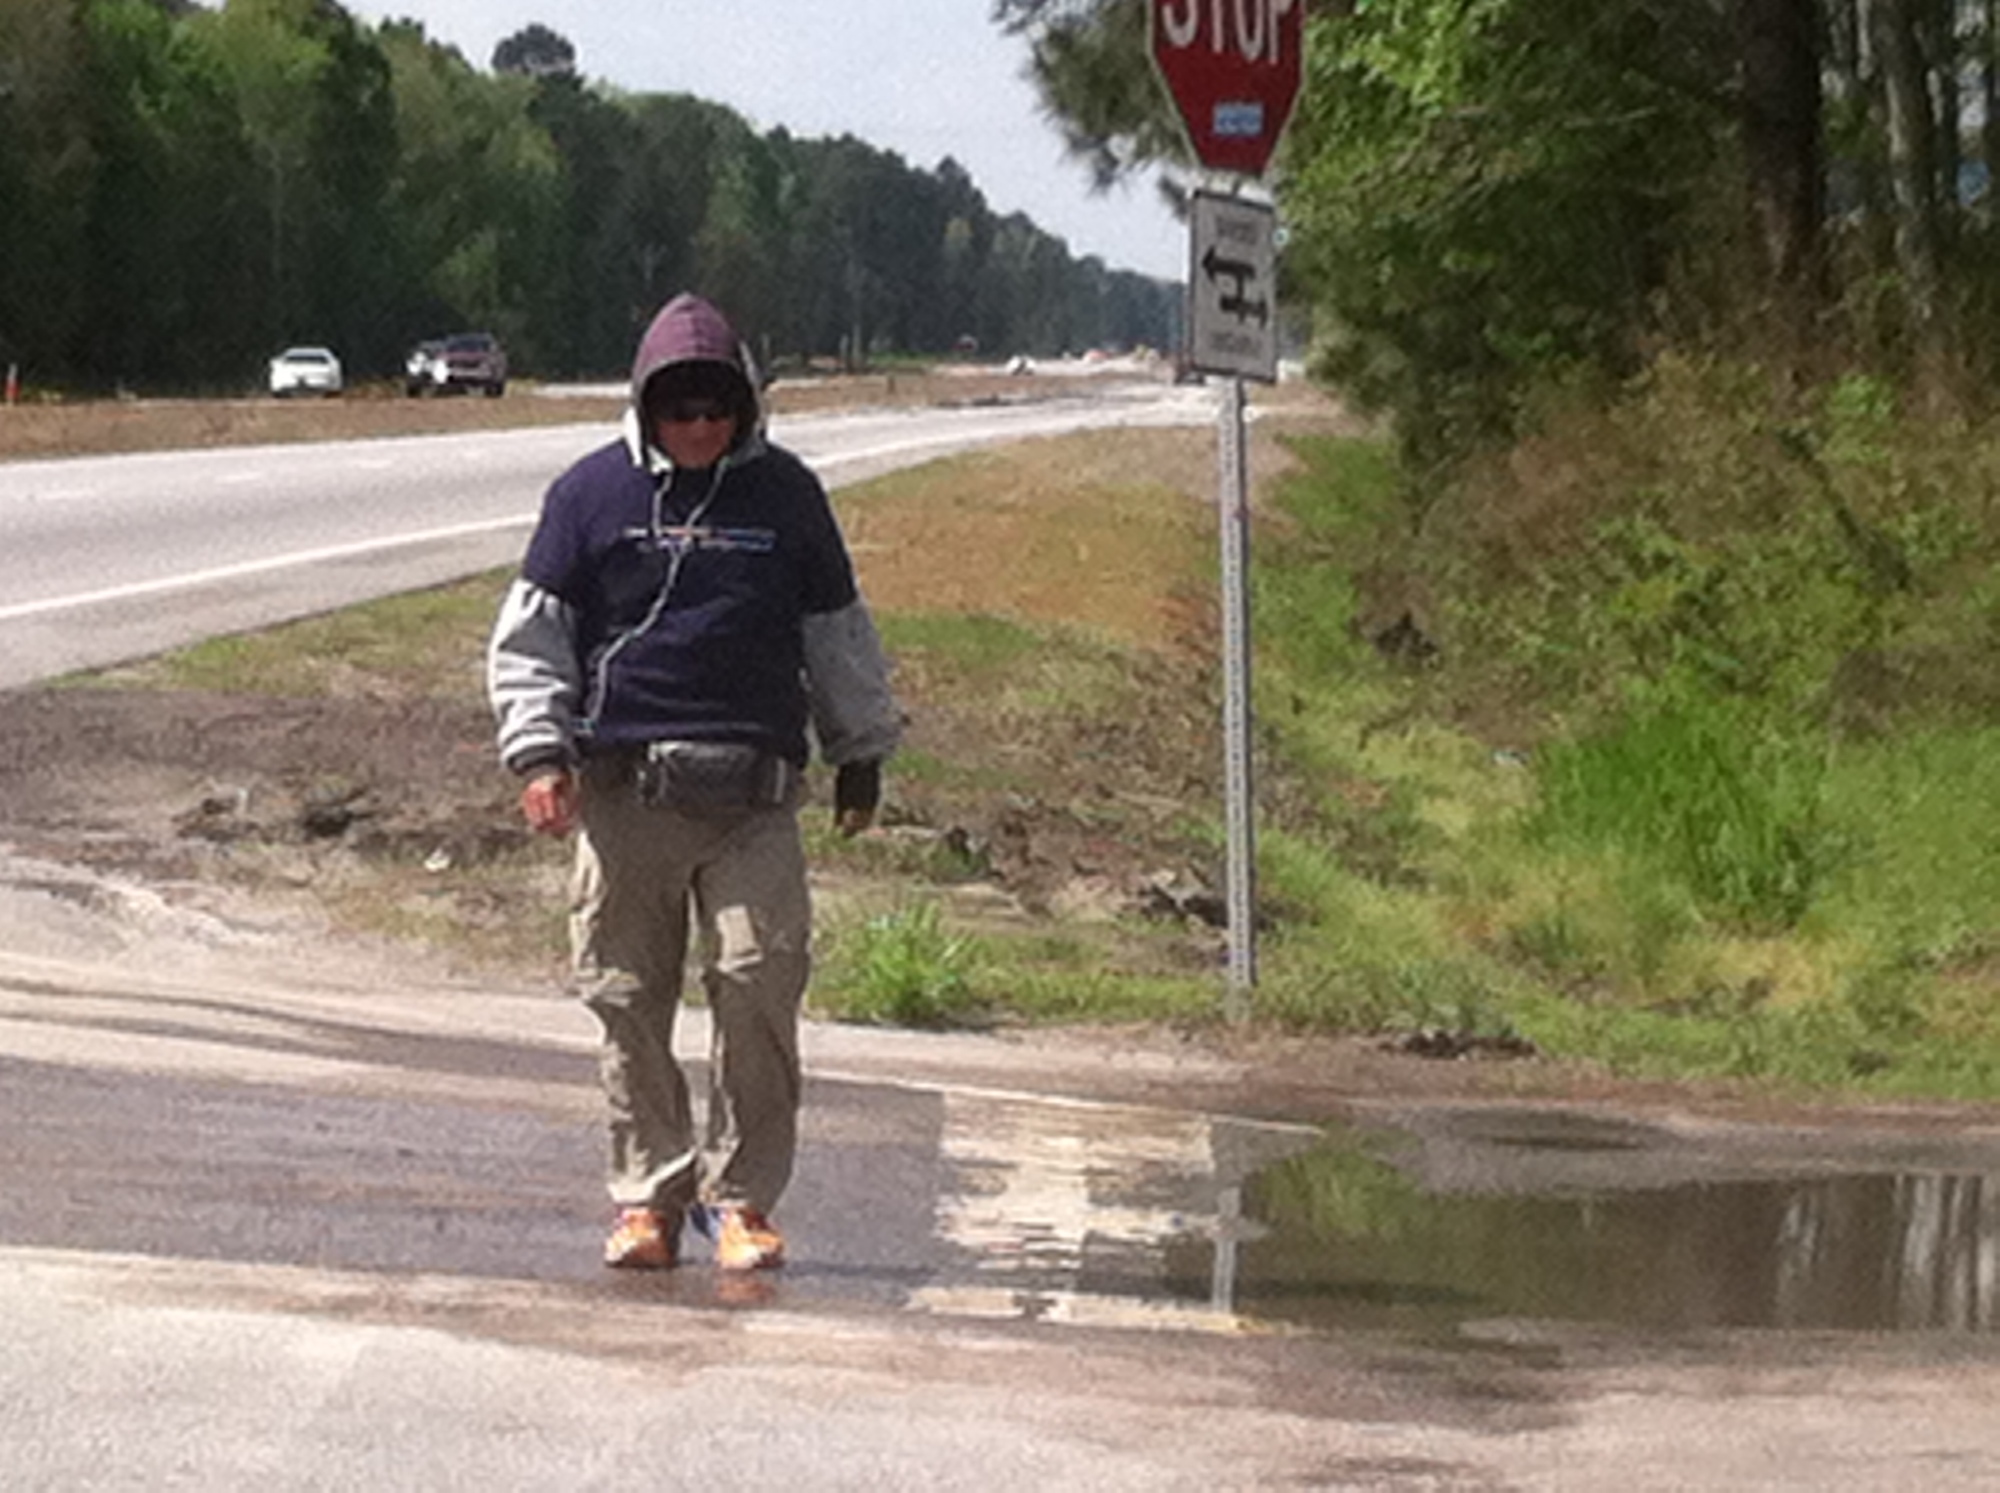 Richard Albero walked regardless of the weather. Courtesy photo. He walked six days and rested on the seventh.